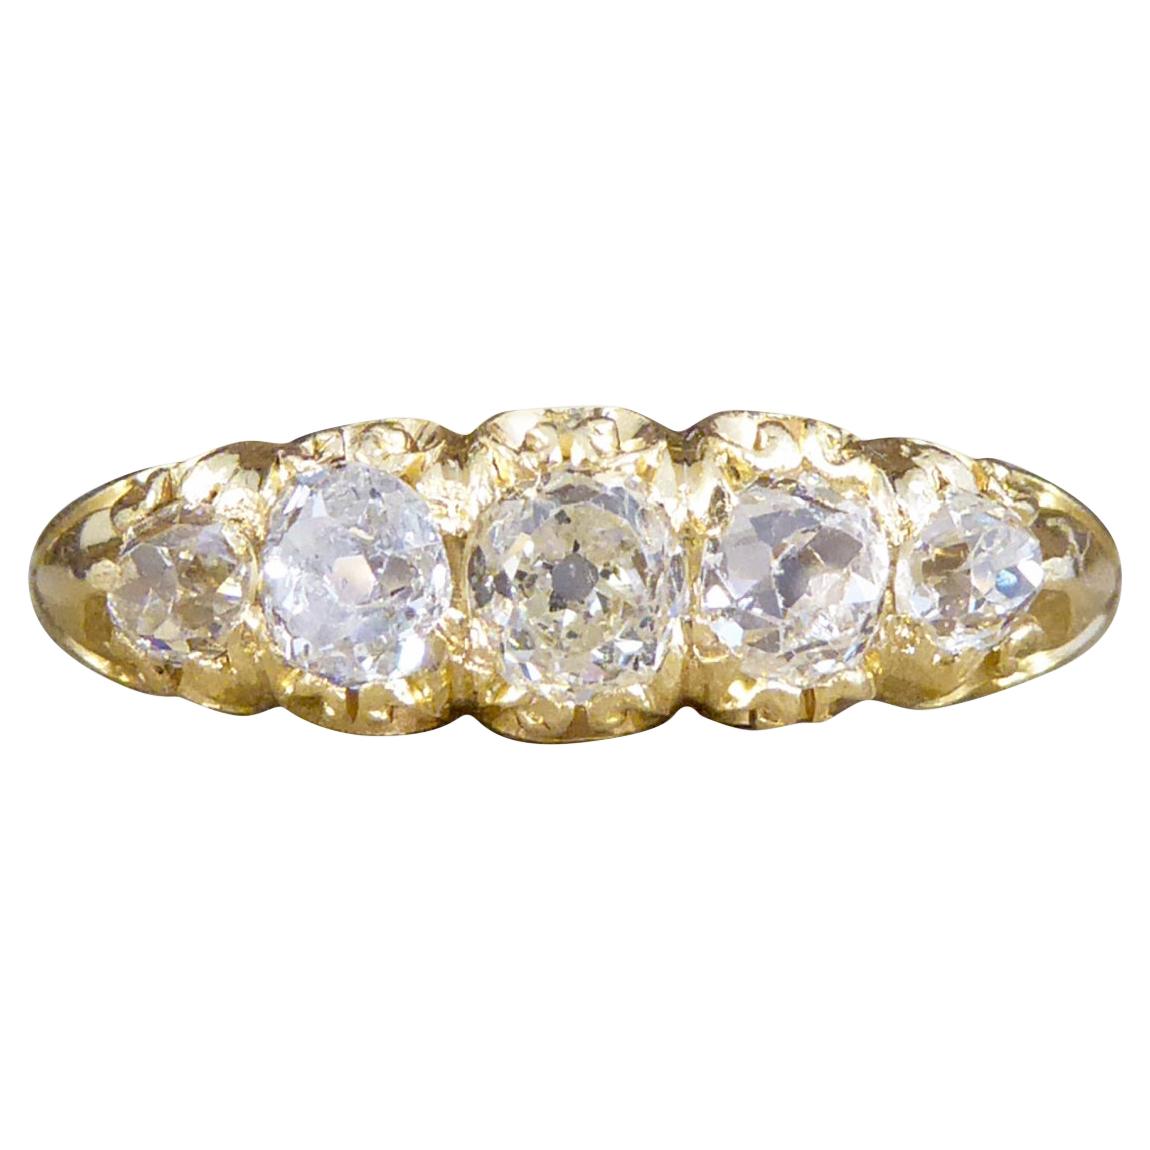 Antique Late Victorian Five Stone Diamond Cushion Cut Ring in 18ct Yellow Gold